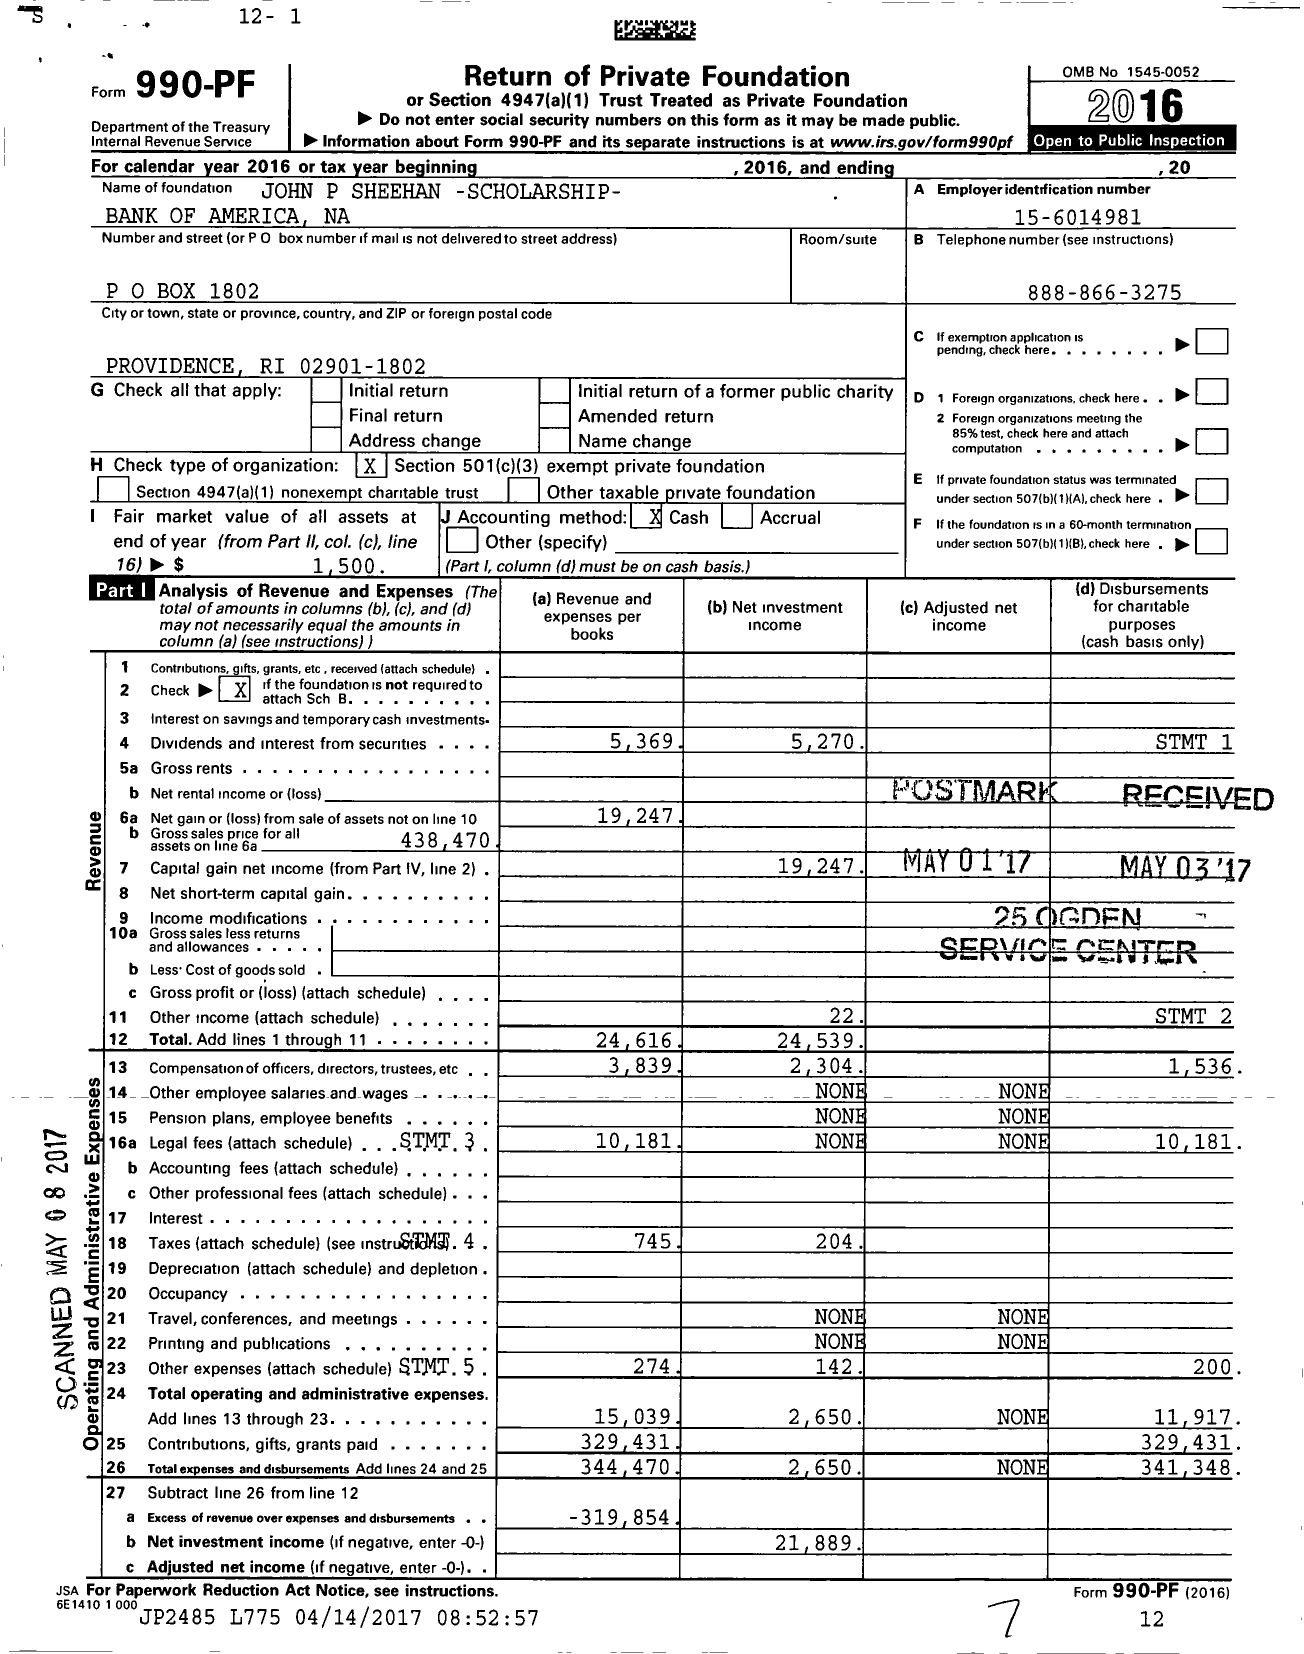 Image of first page of 2016 Form 990PF for John P Sheehan- Scholarship Bank of America Na